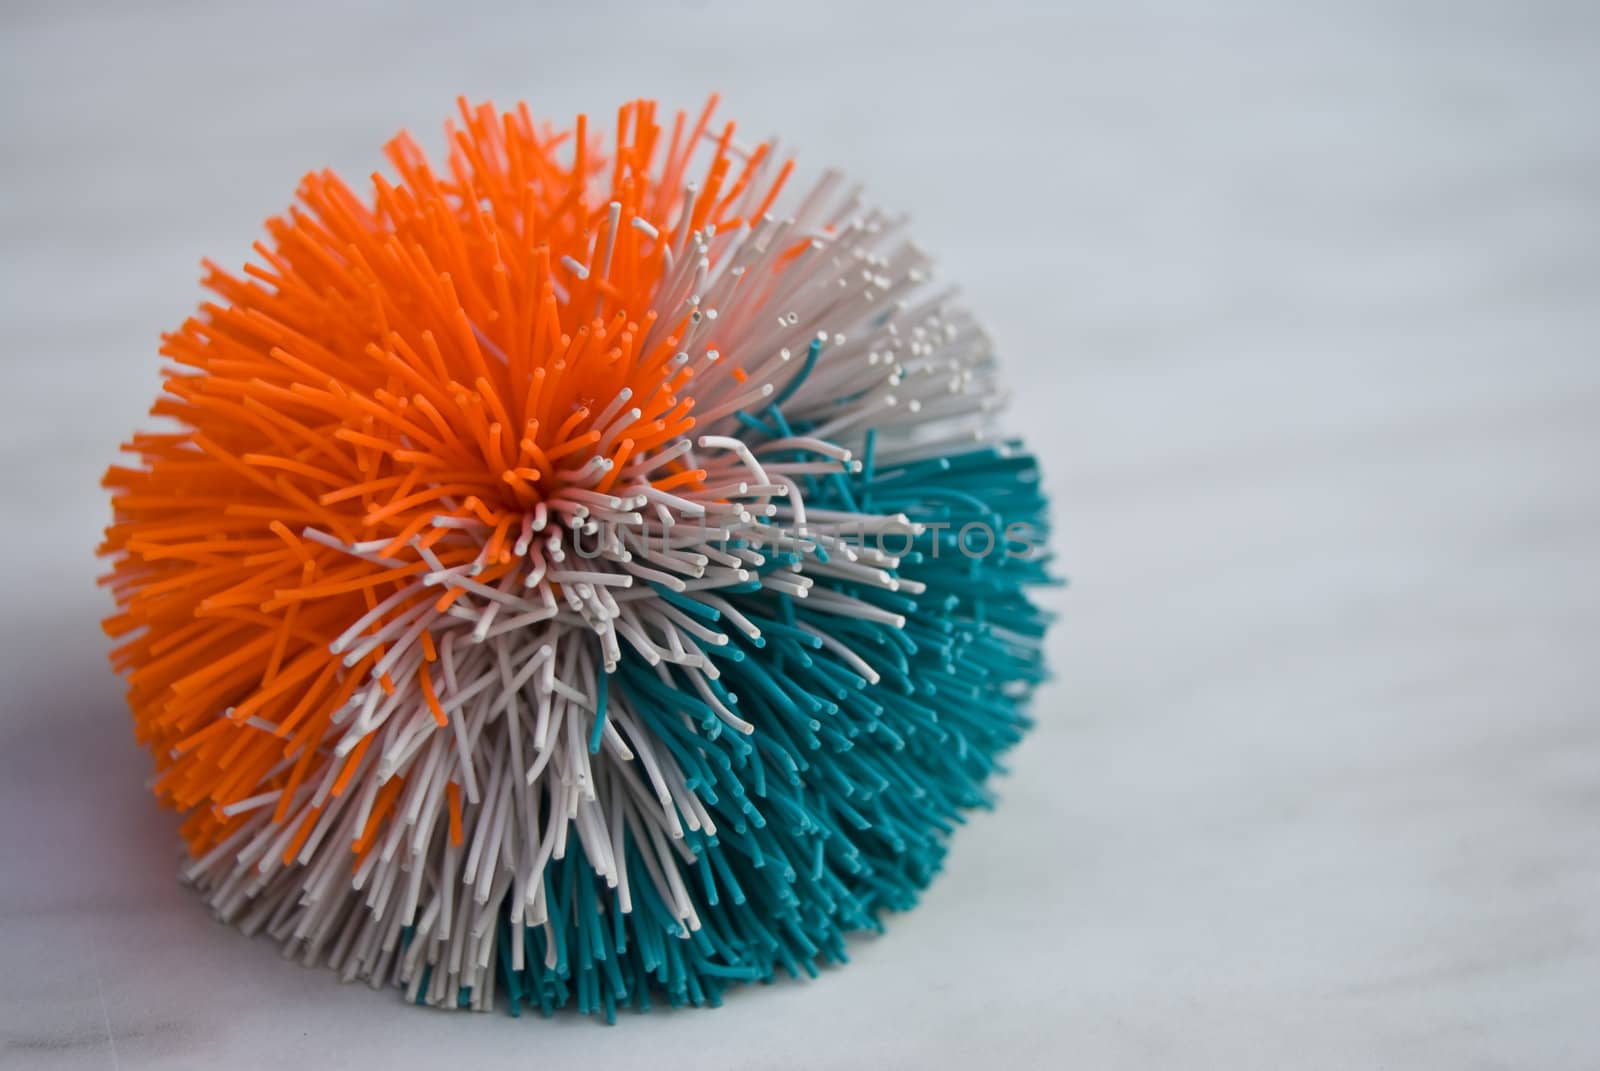 fuzzy ball in orange, grey and blue on a table